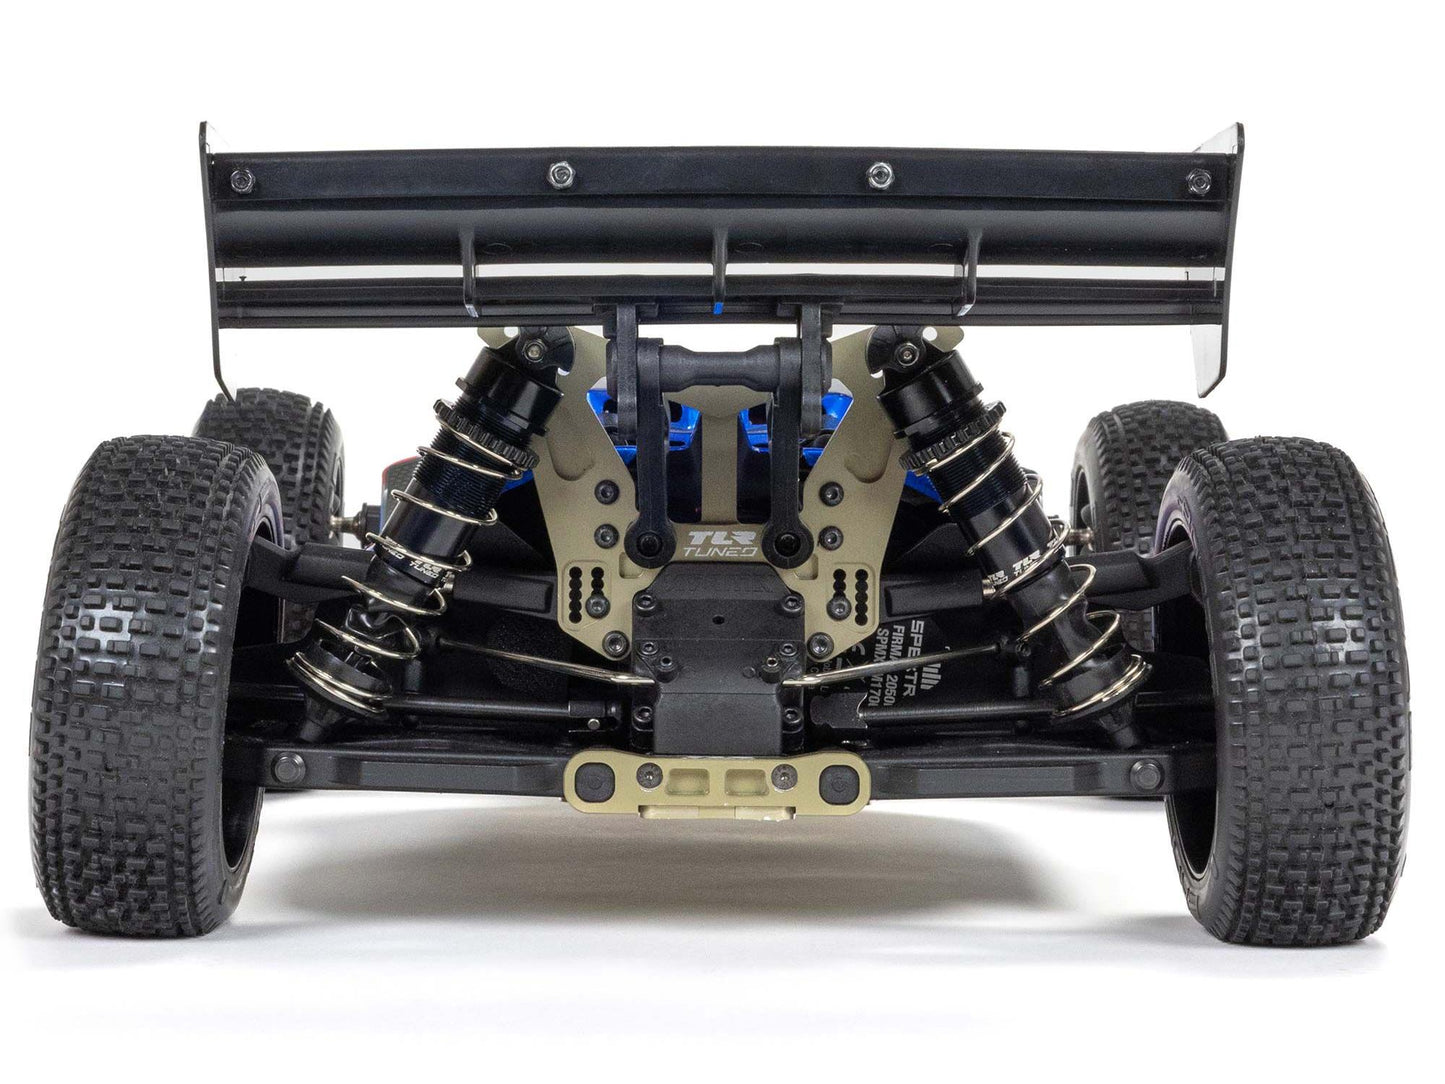 1/8 TLR Tuned Typhon 6S 4WD BLX Buggy RTR, Red/Blue